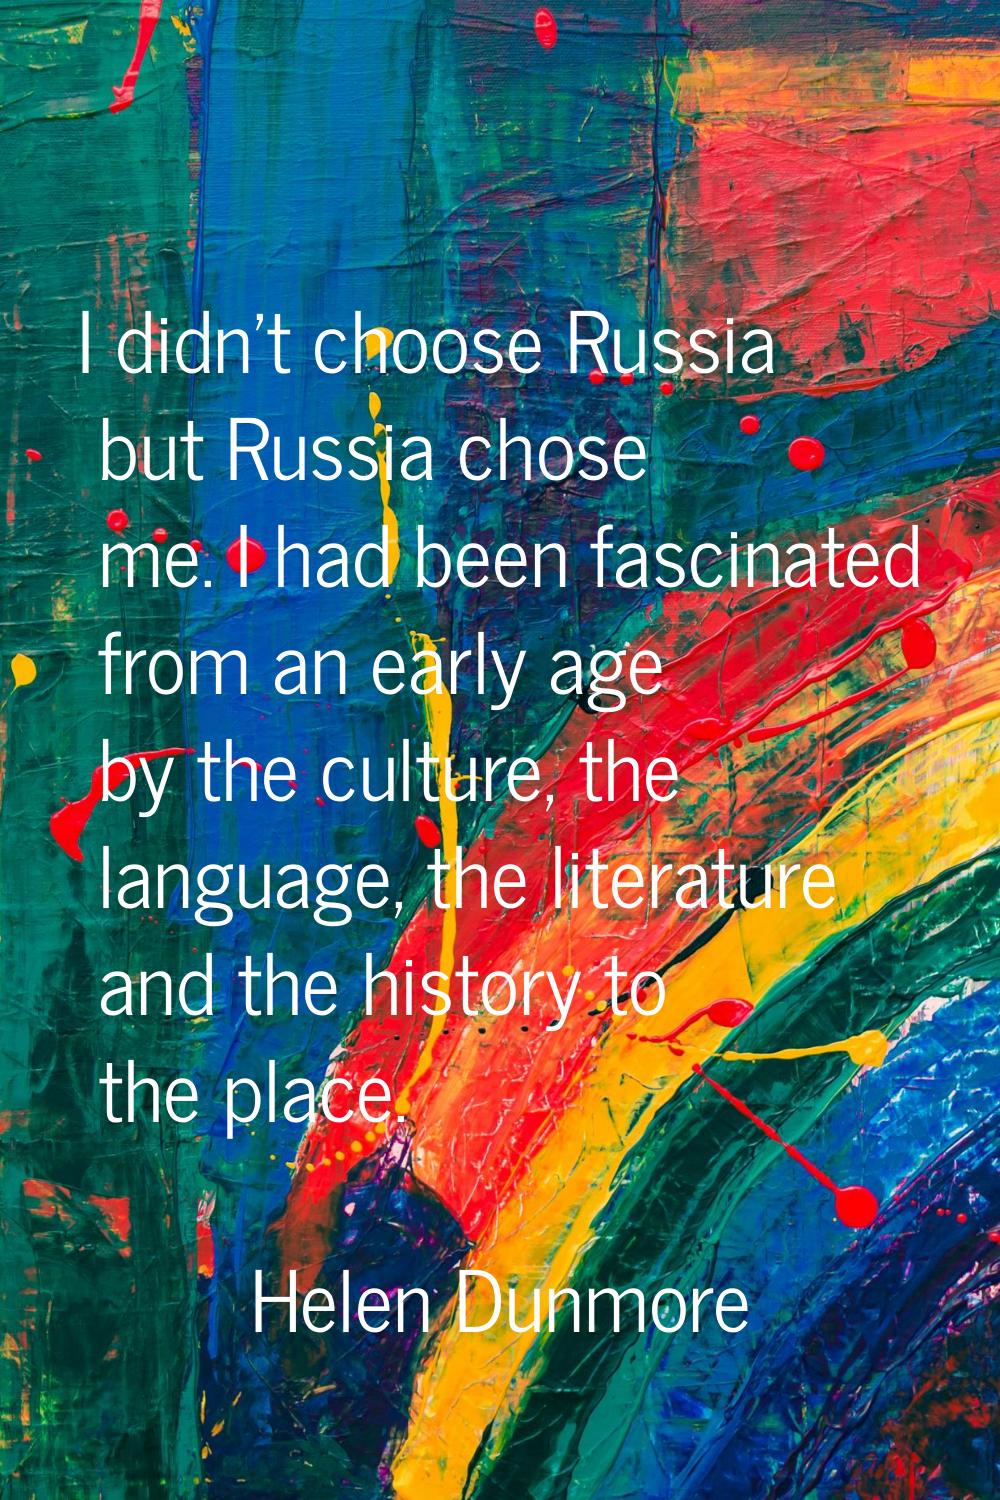 I didn't choose Russia but Russia chose me. I had been fascinated from an early age by the culture,